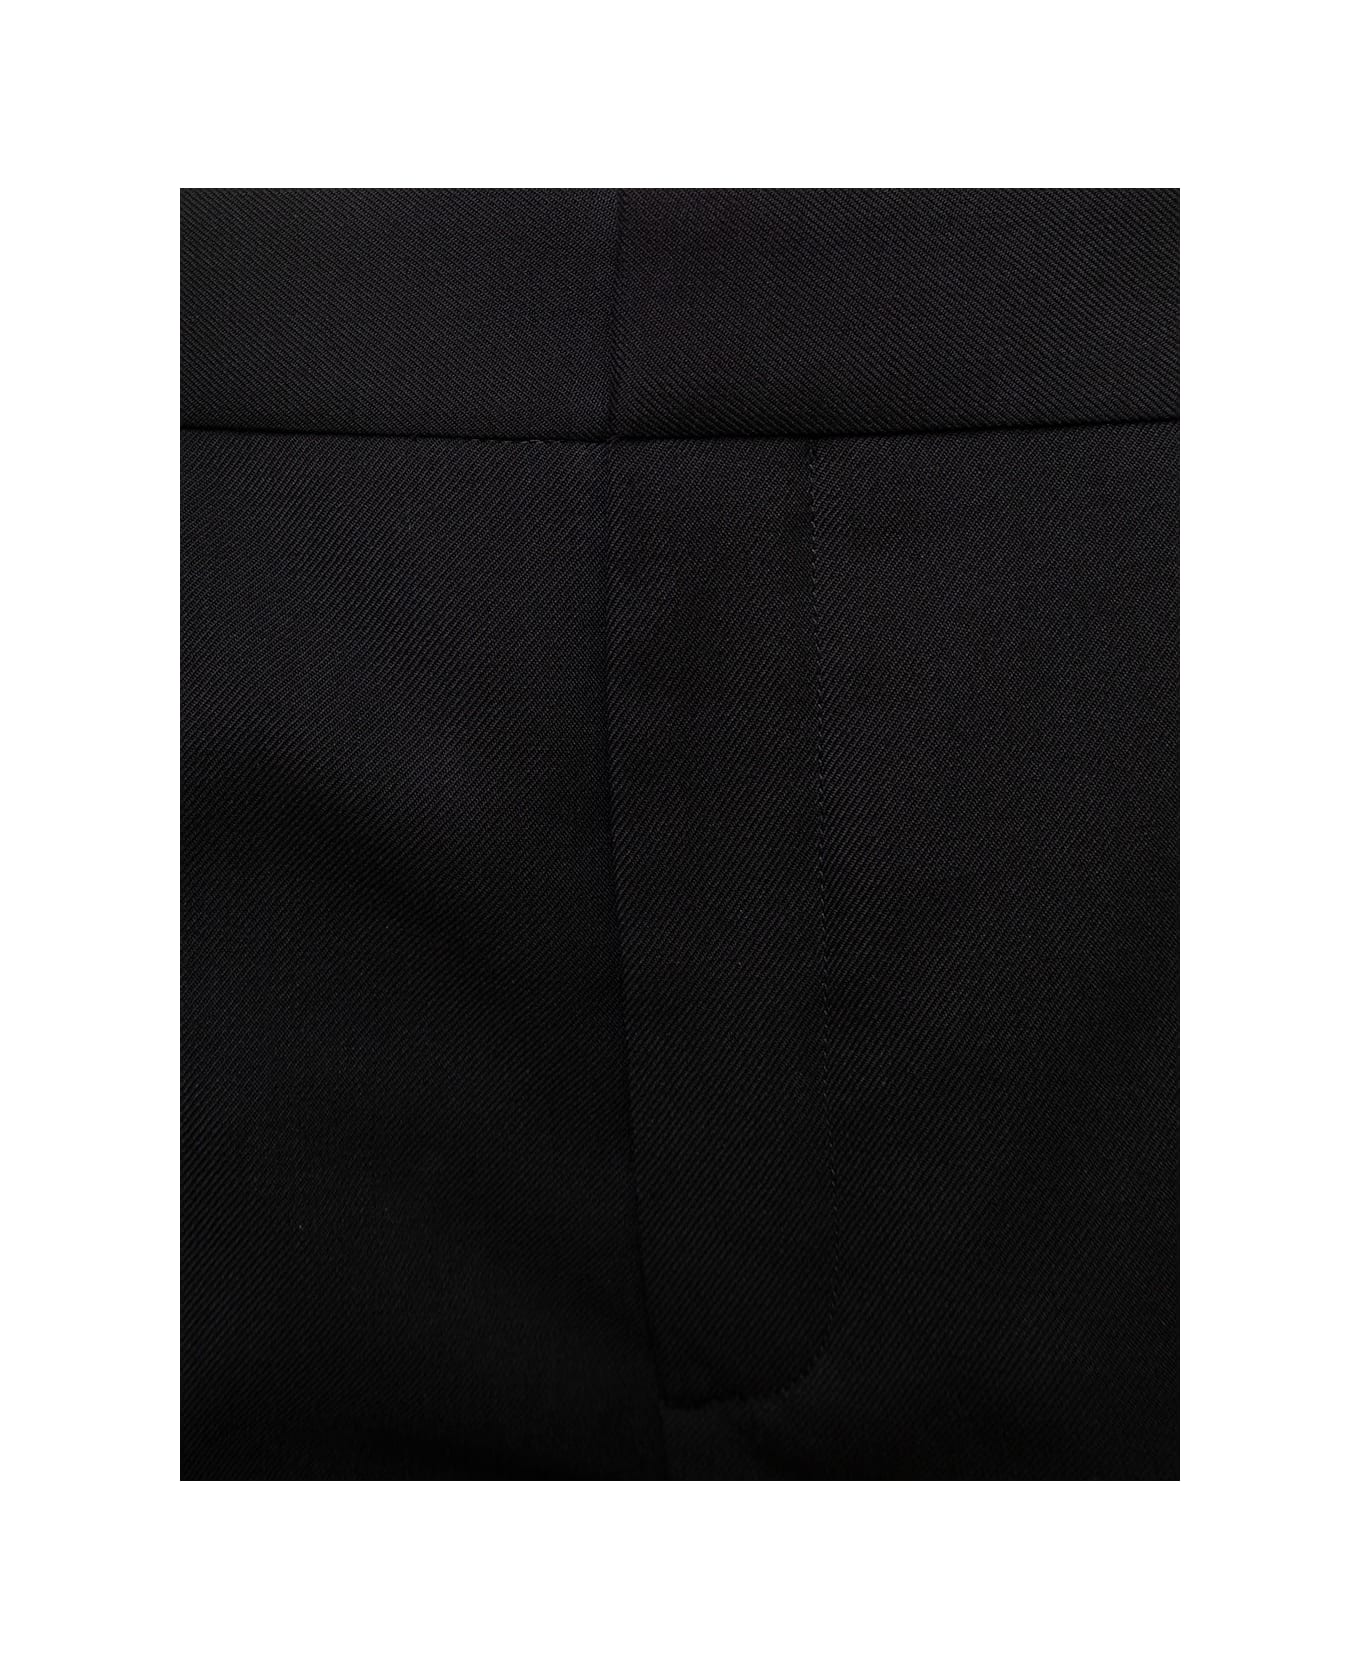 Saint Laurent Black Slim Pamts With Welt Pockets In Wool Woman - Black